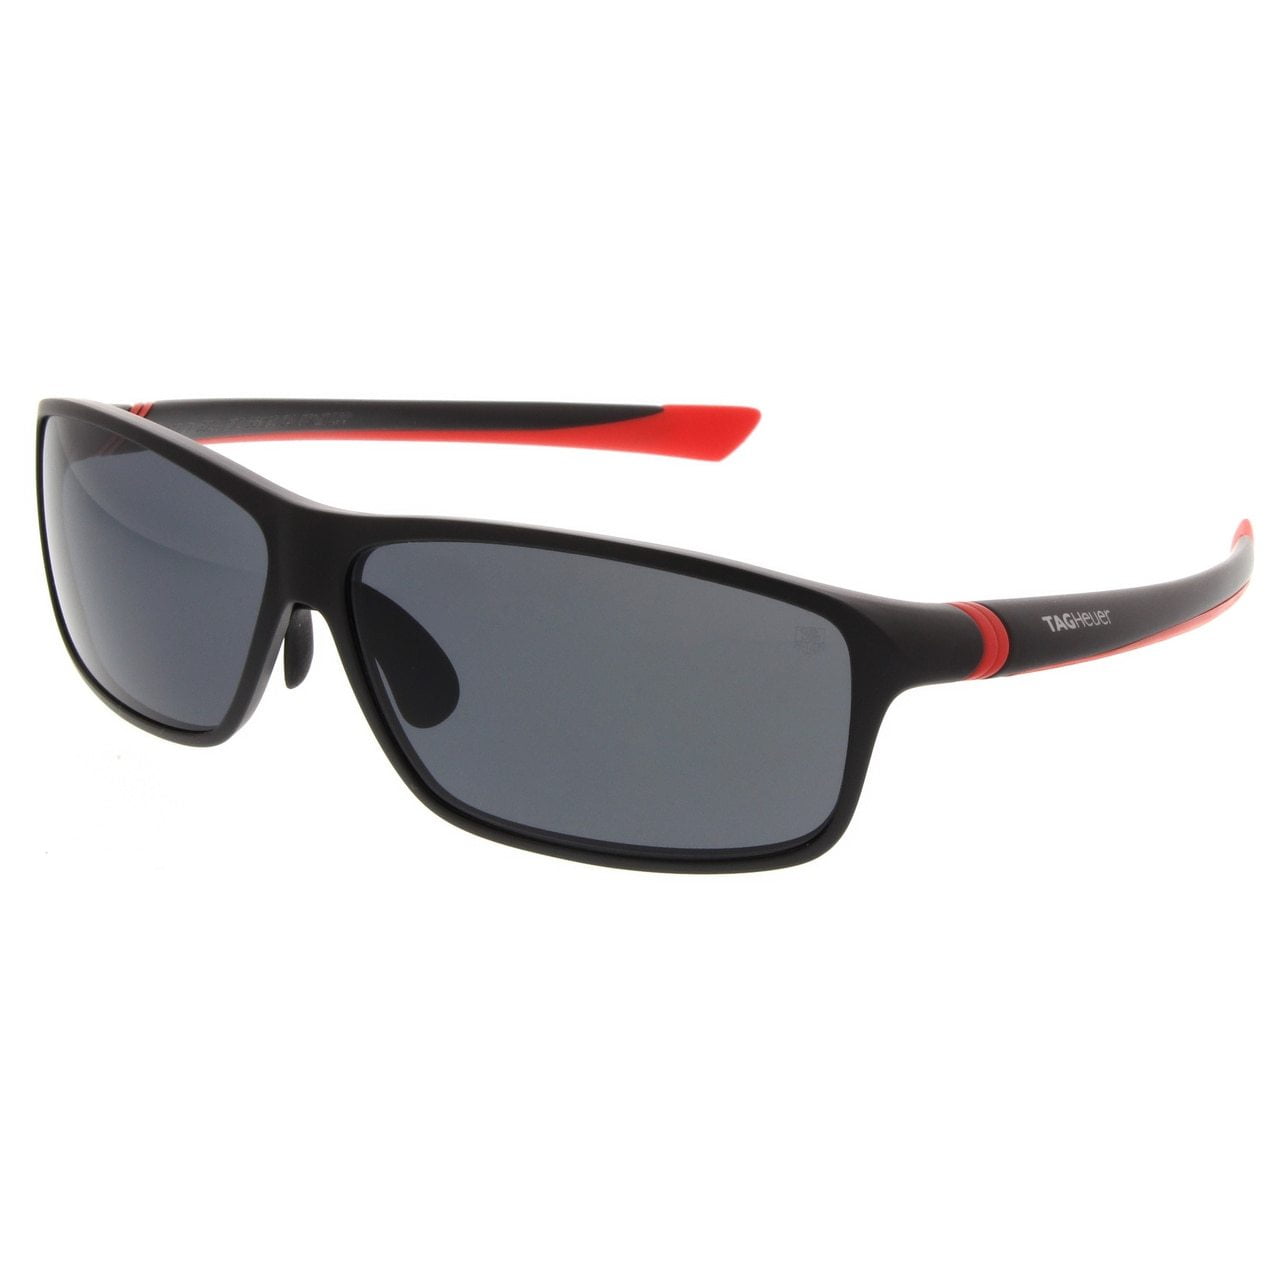 Tag Heuer 27 Degree 6021 102 Matte Black & Red Sports Sunglasses Sonnenbrille